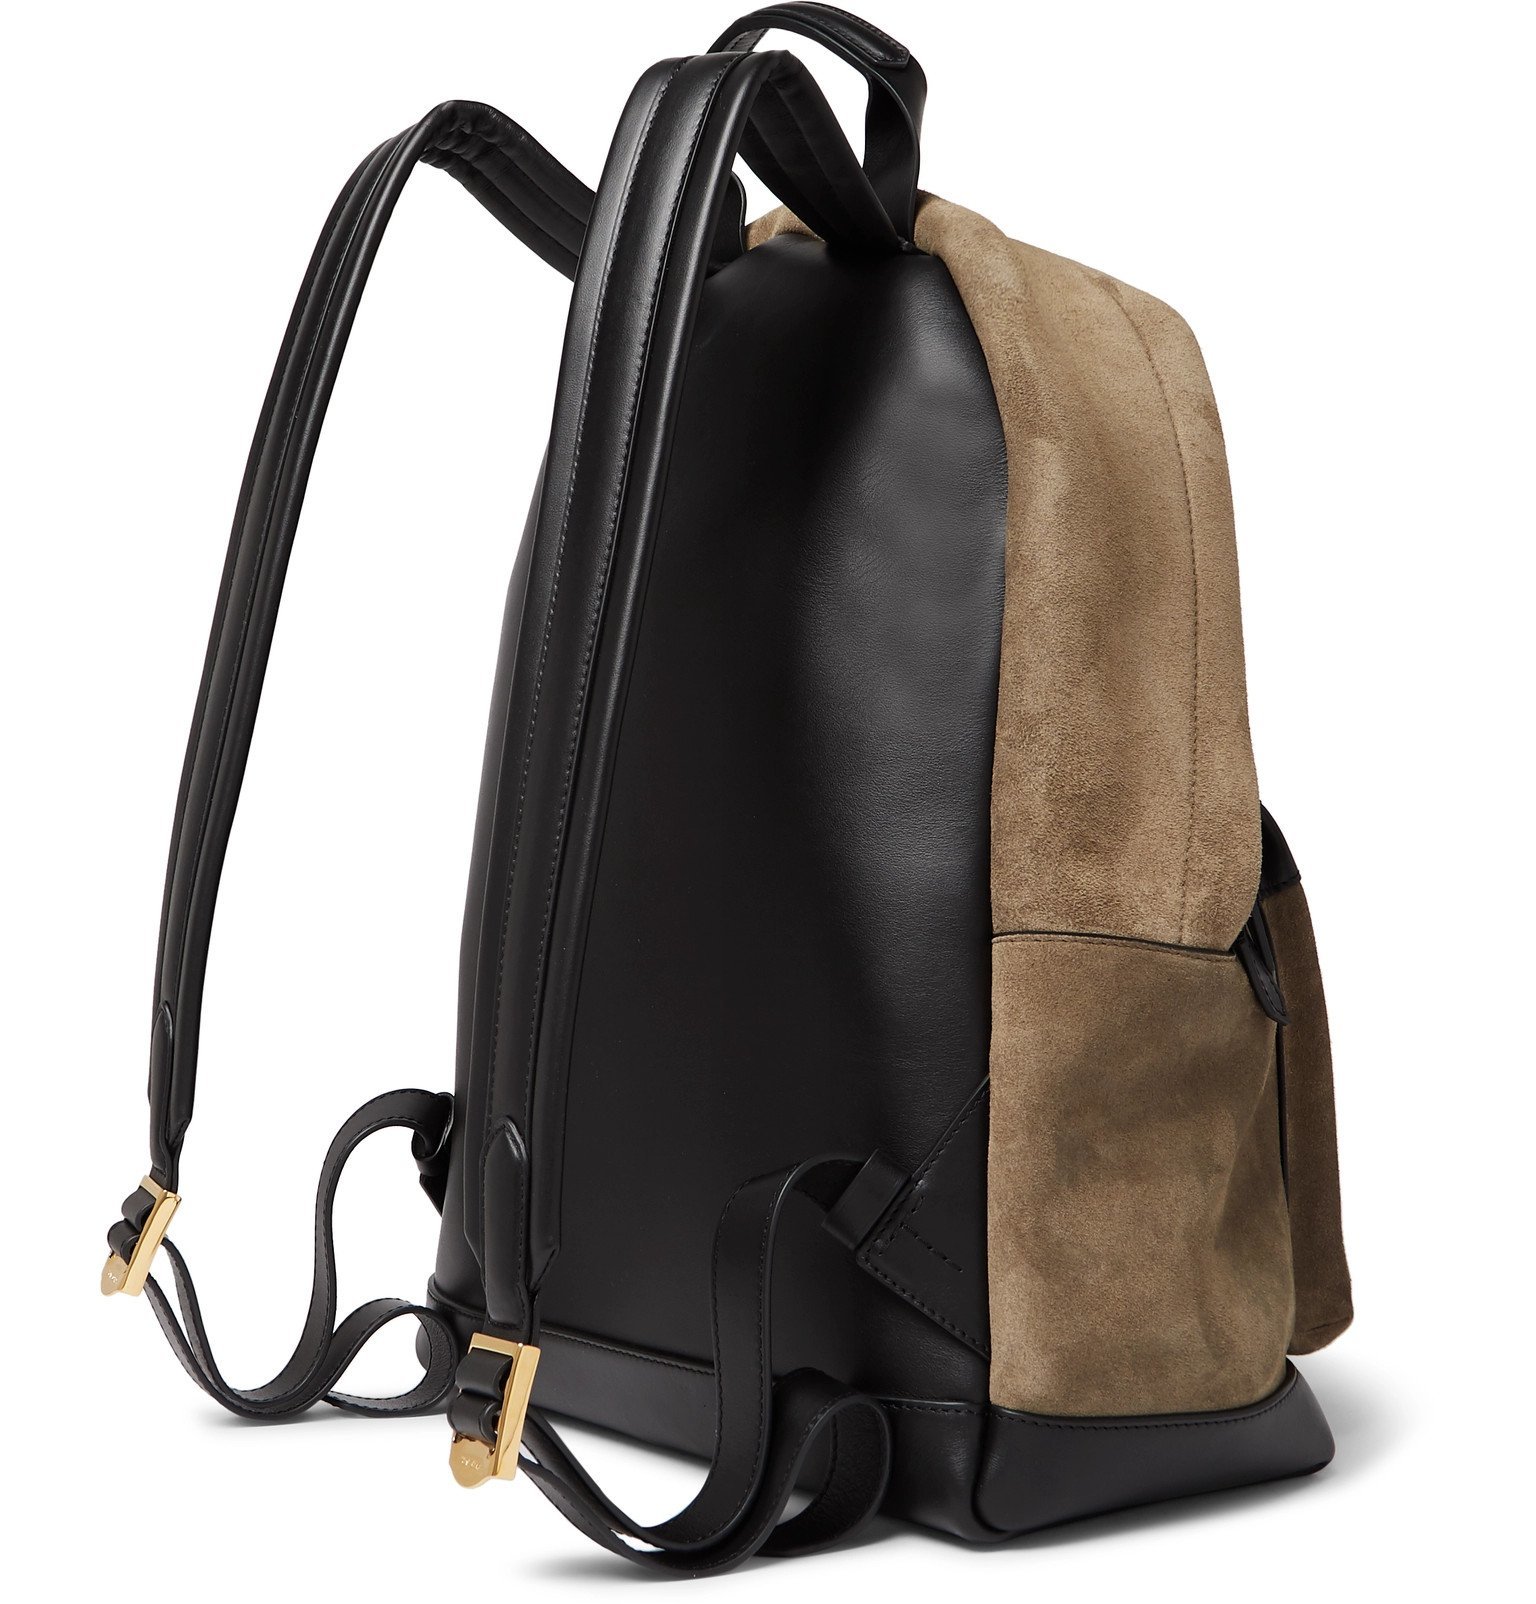 TOM FORD - Suede and Leather Backpack - Brown TOM FORD